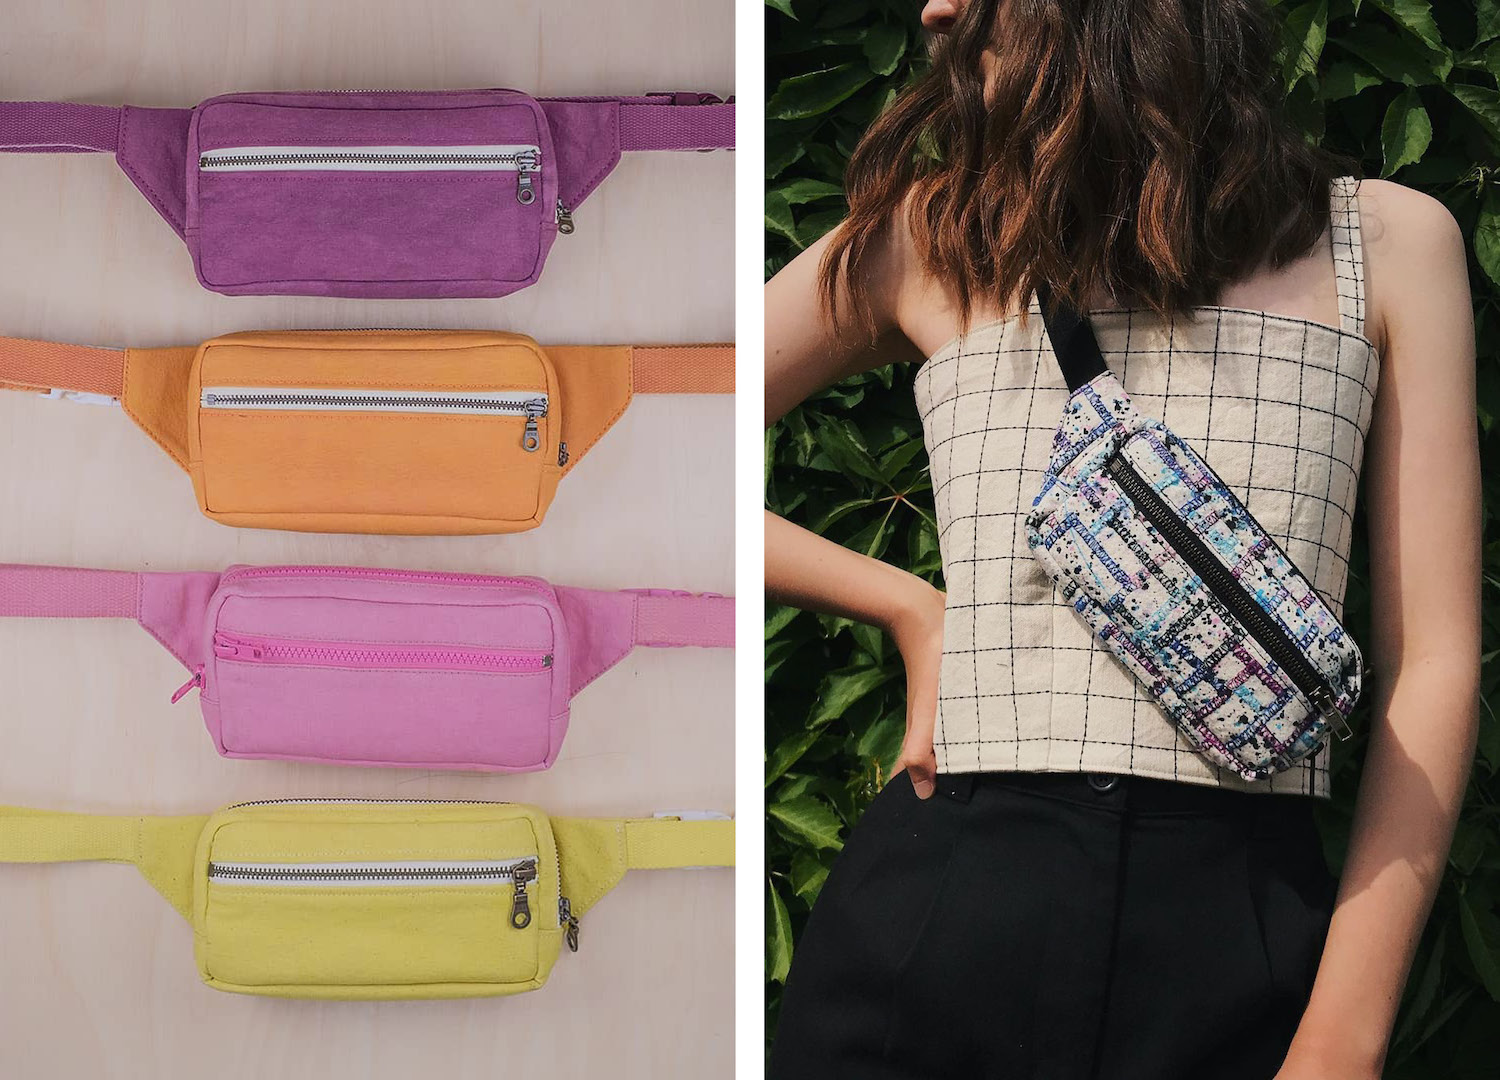 Add a #MeMade Touch to Any Outfit with These Sweet Bag Patterns ...